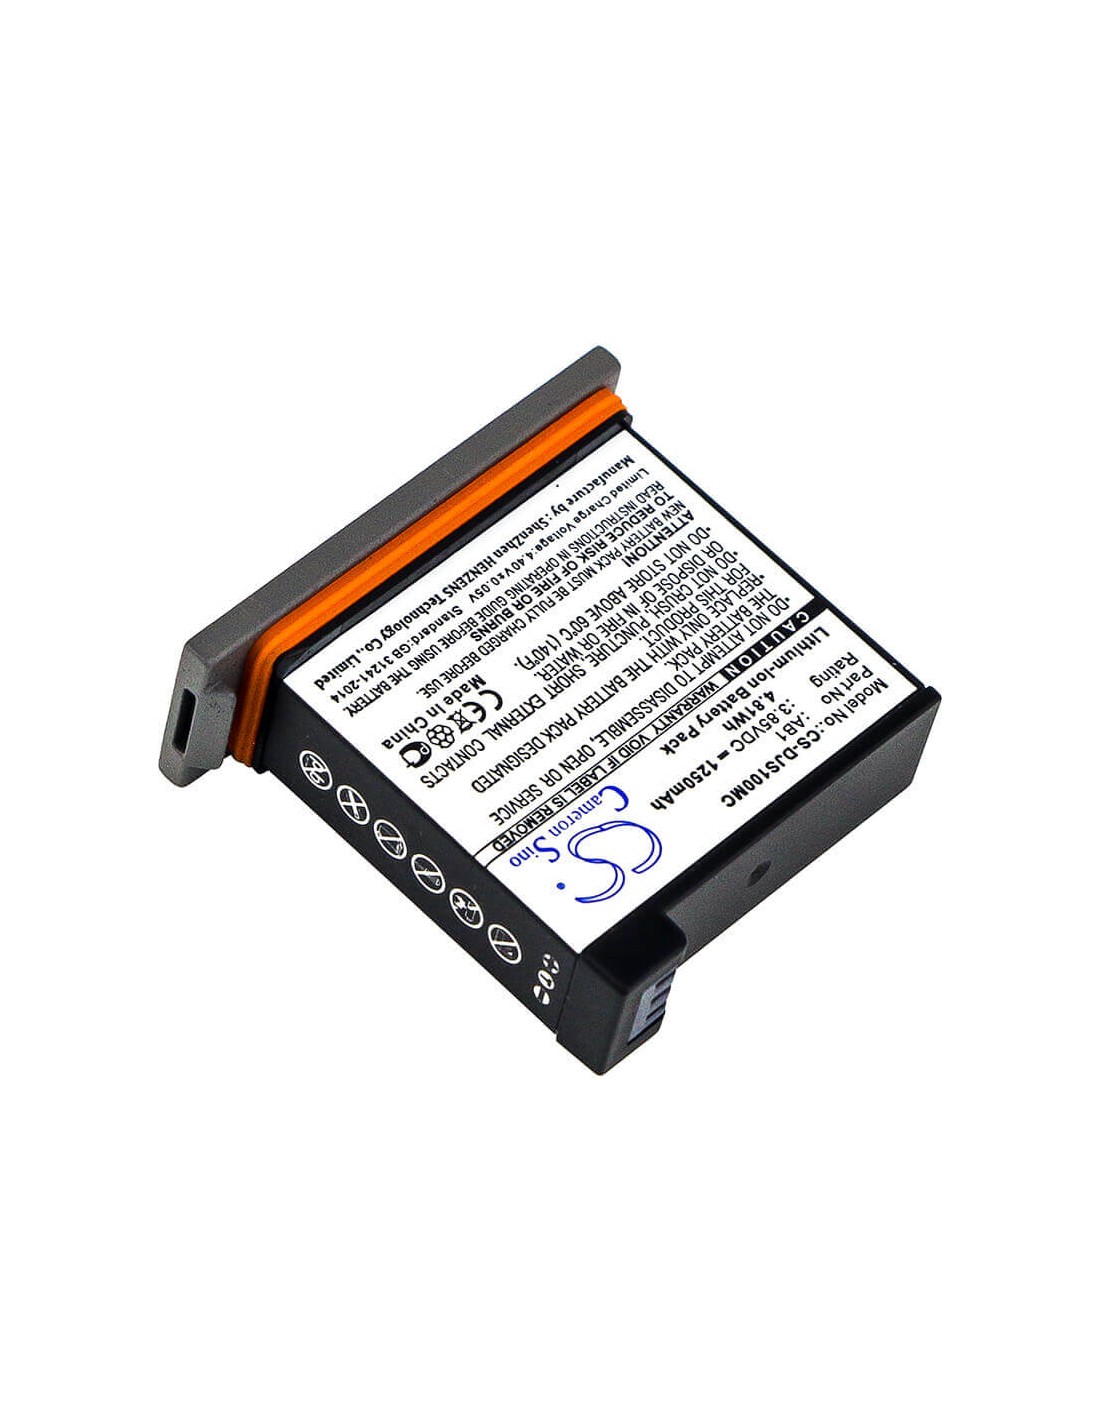 Battery for Dji, Osmo Action, 3.85V, 1250mAh - 4.81Wh